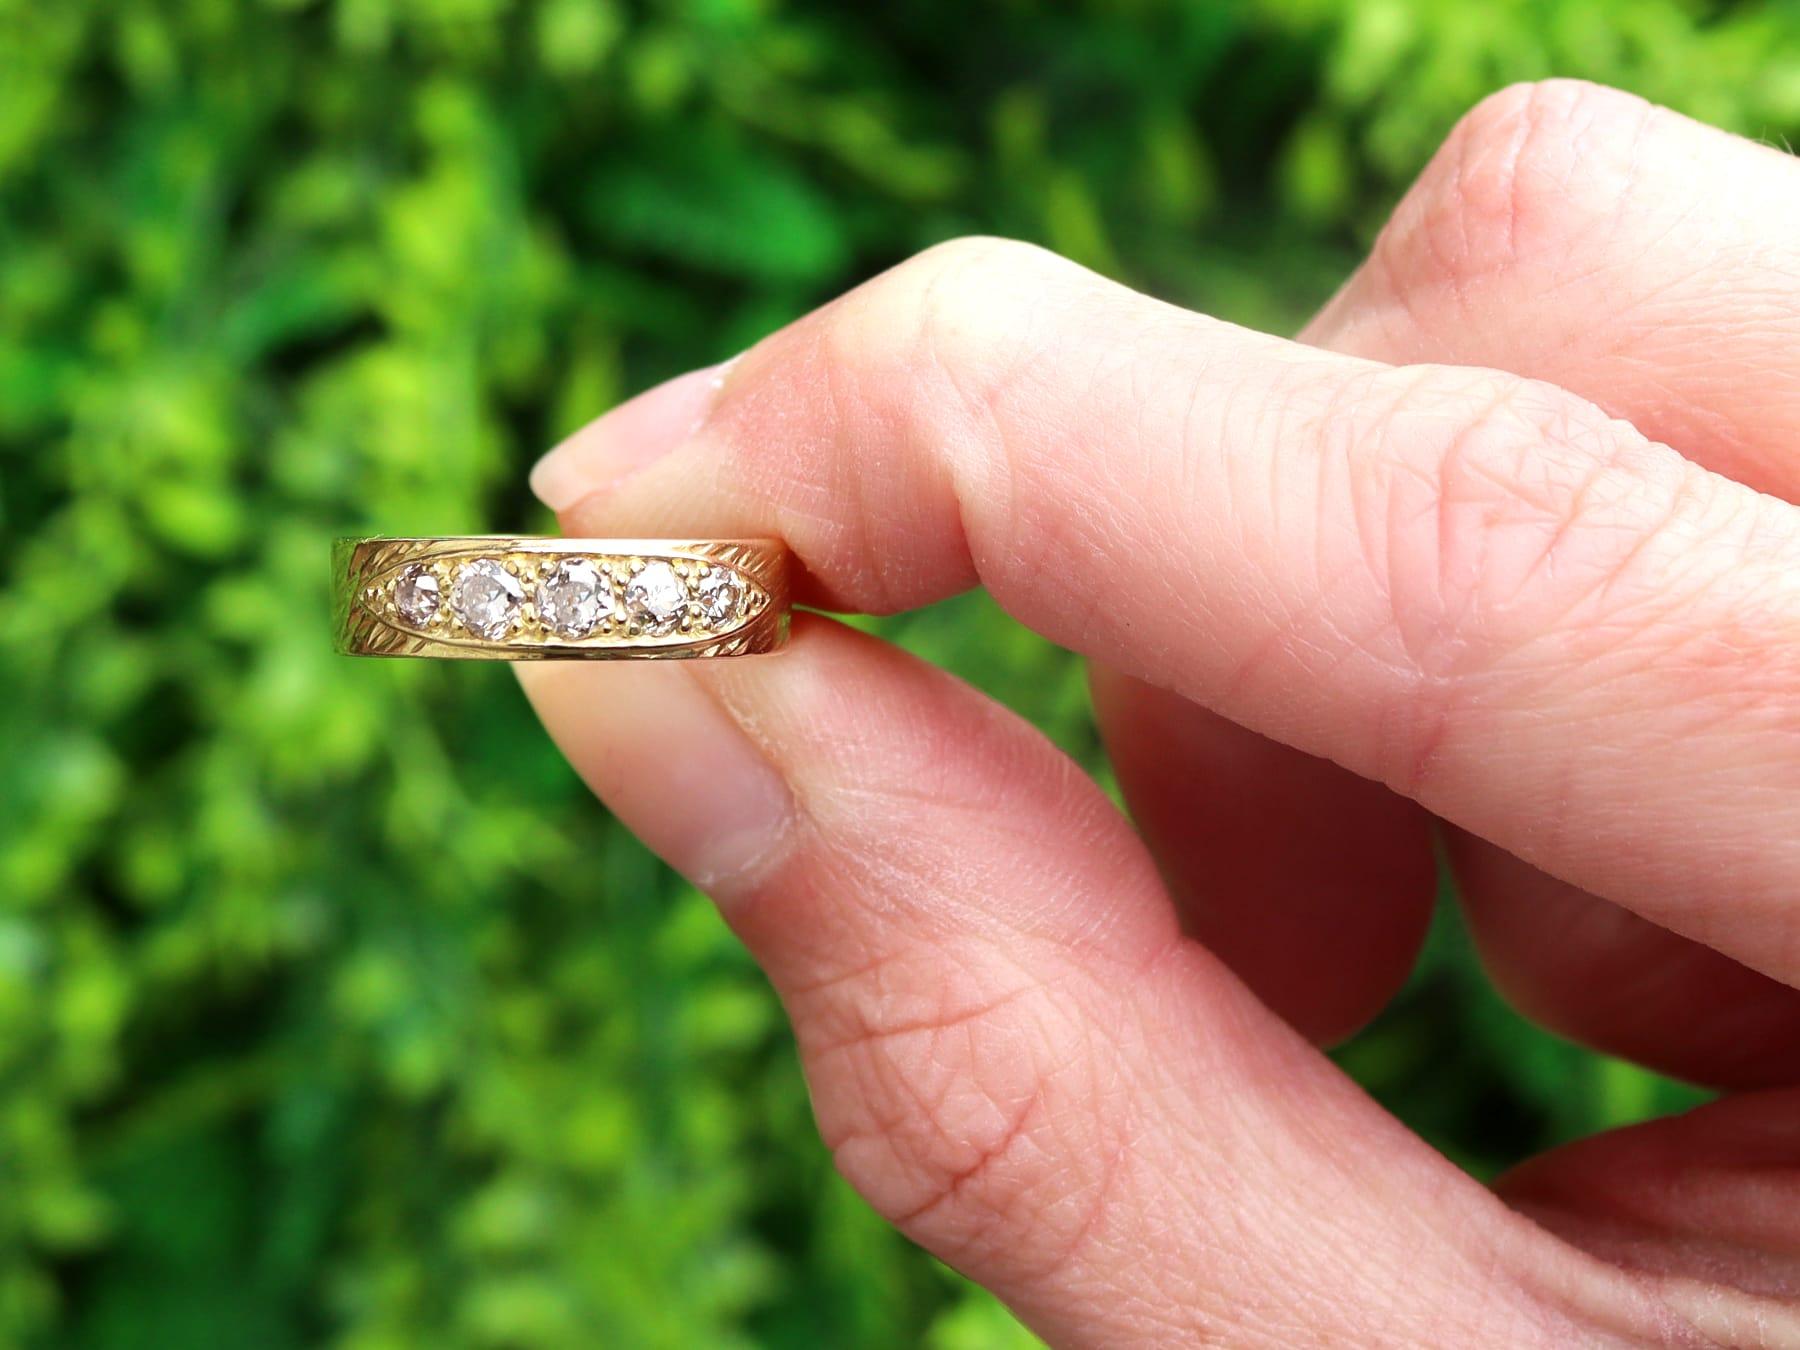 A fine and impressive vintage 18 karat yellow gold dress ring set with 0.40 ct of antique diamonds; part of our diverse vintage jewelry and estate jewelry collections

This fine and impressive five stone diamond band has been crafted in 18k yellow